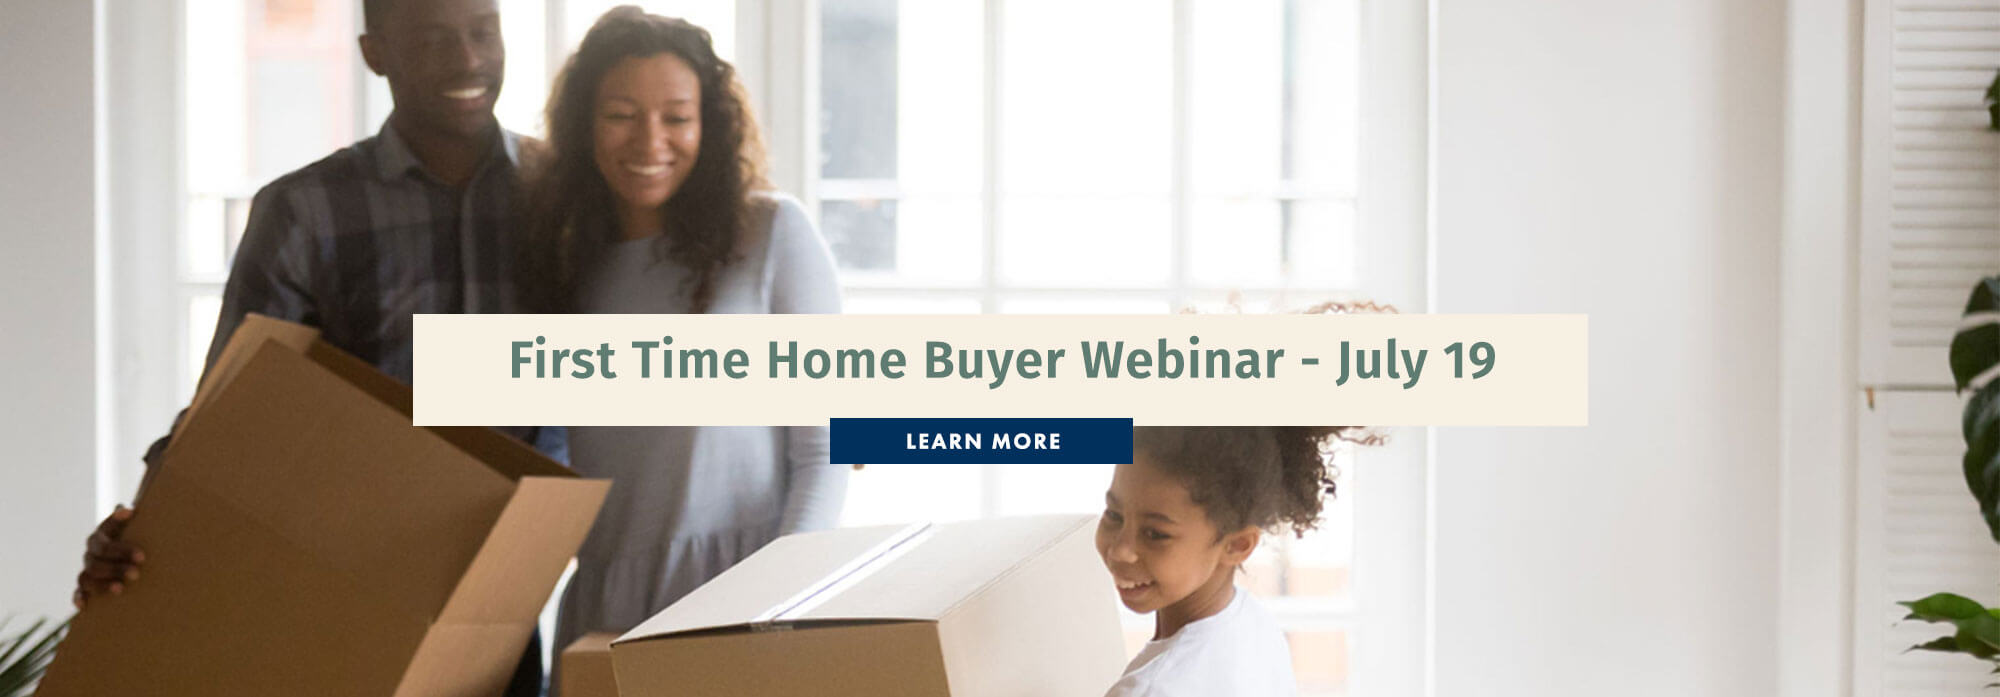 First Time Home Buyer Webinar - July 19